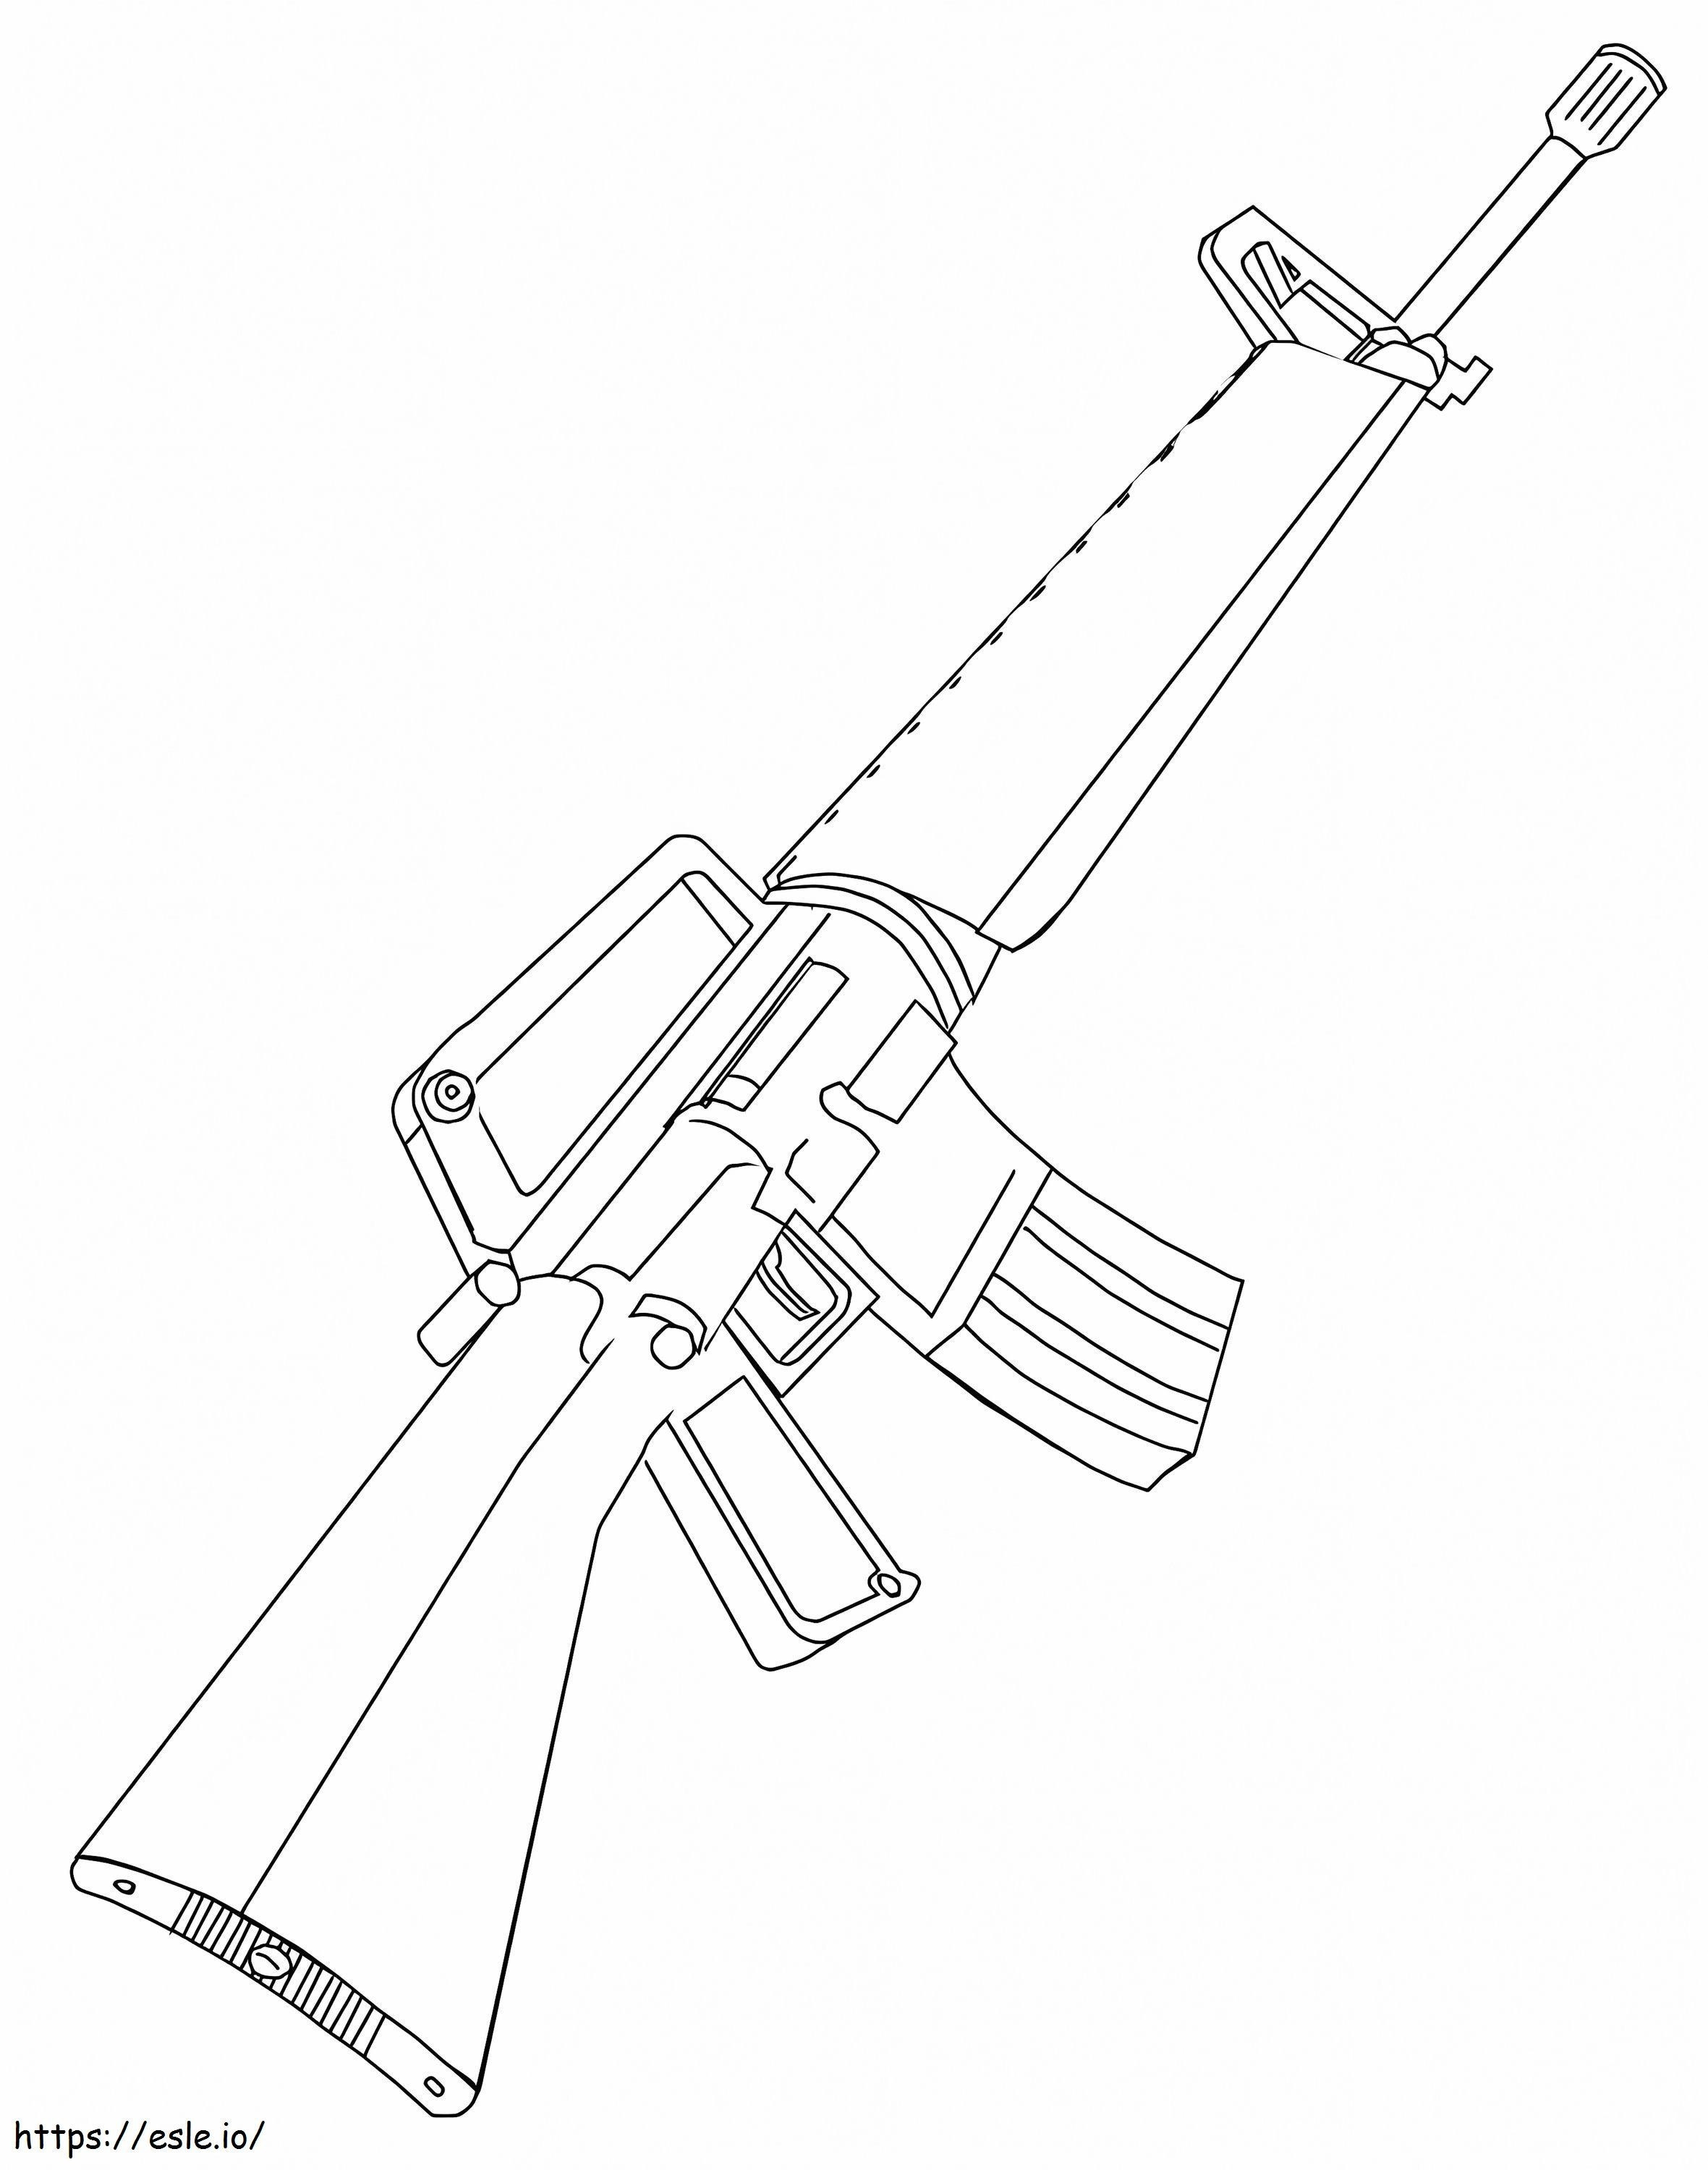 M16 Rifle coloring page